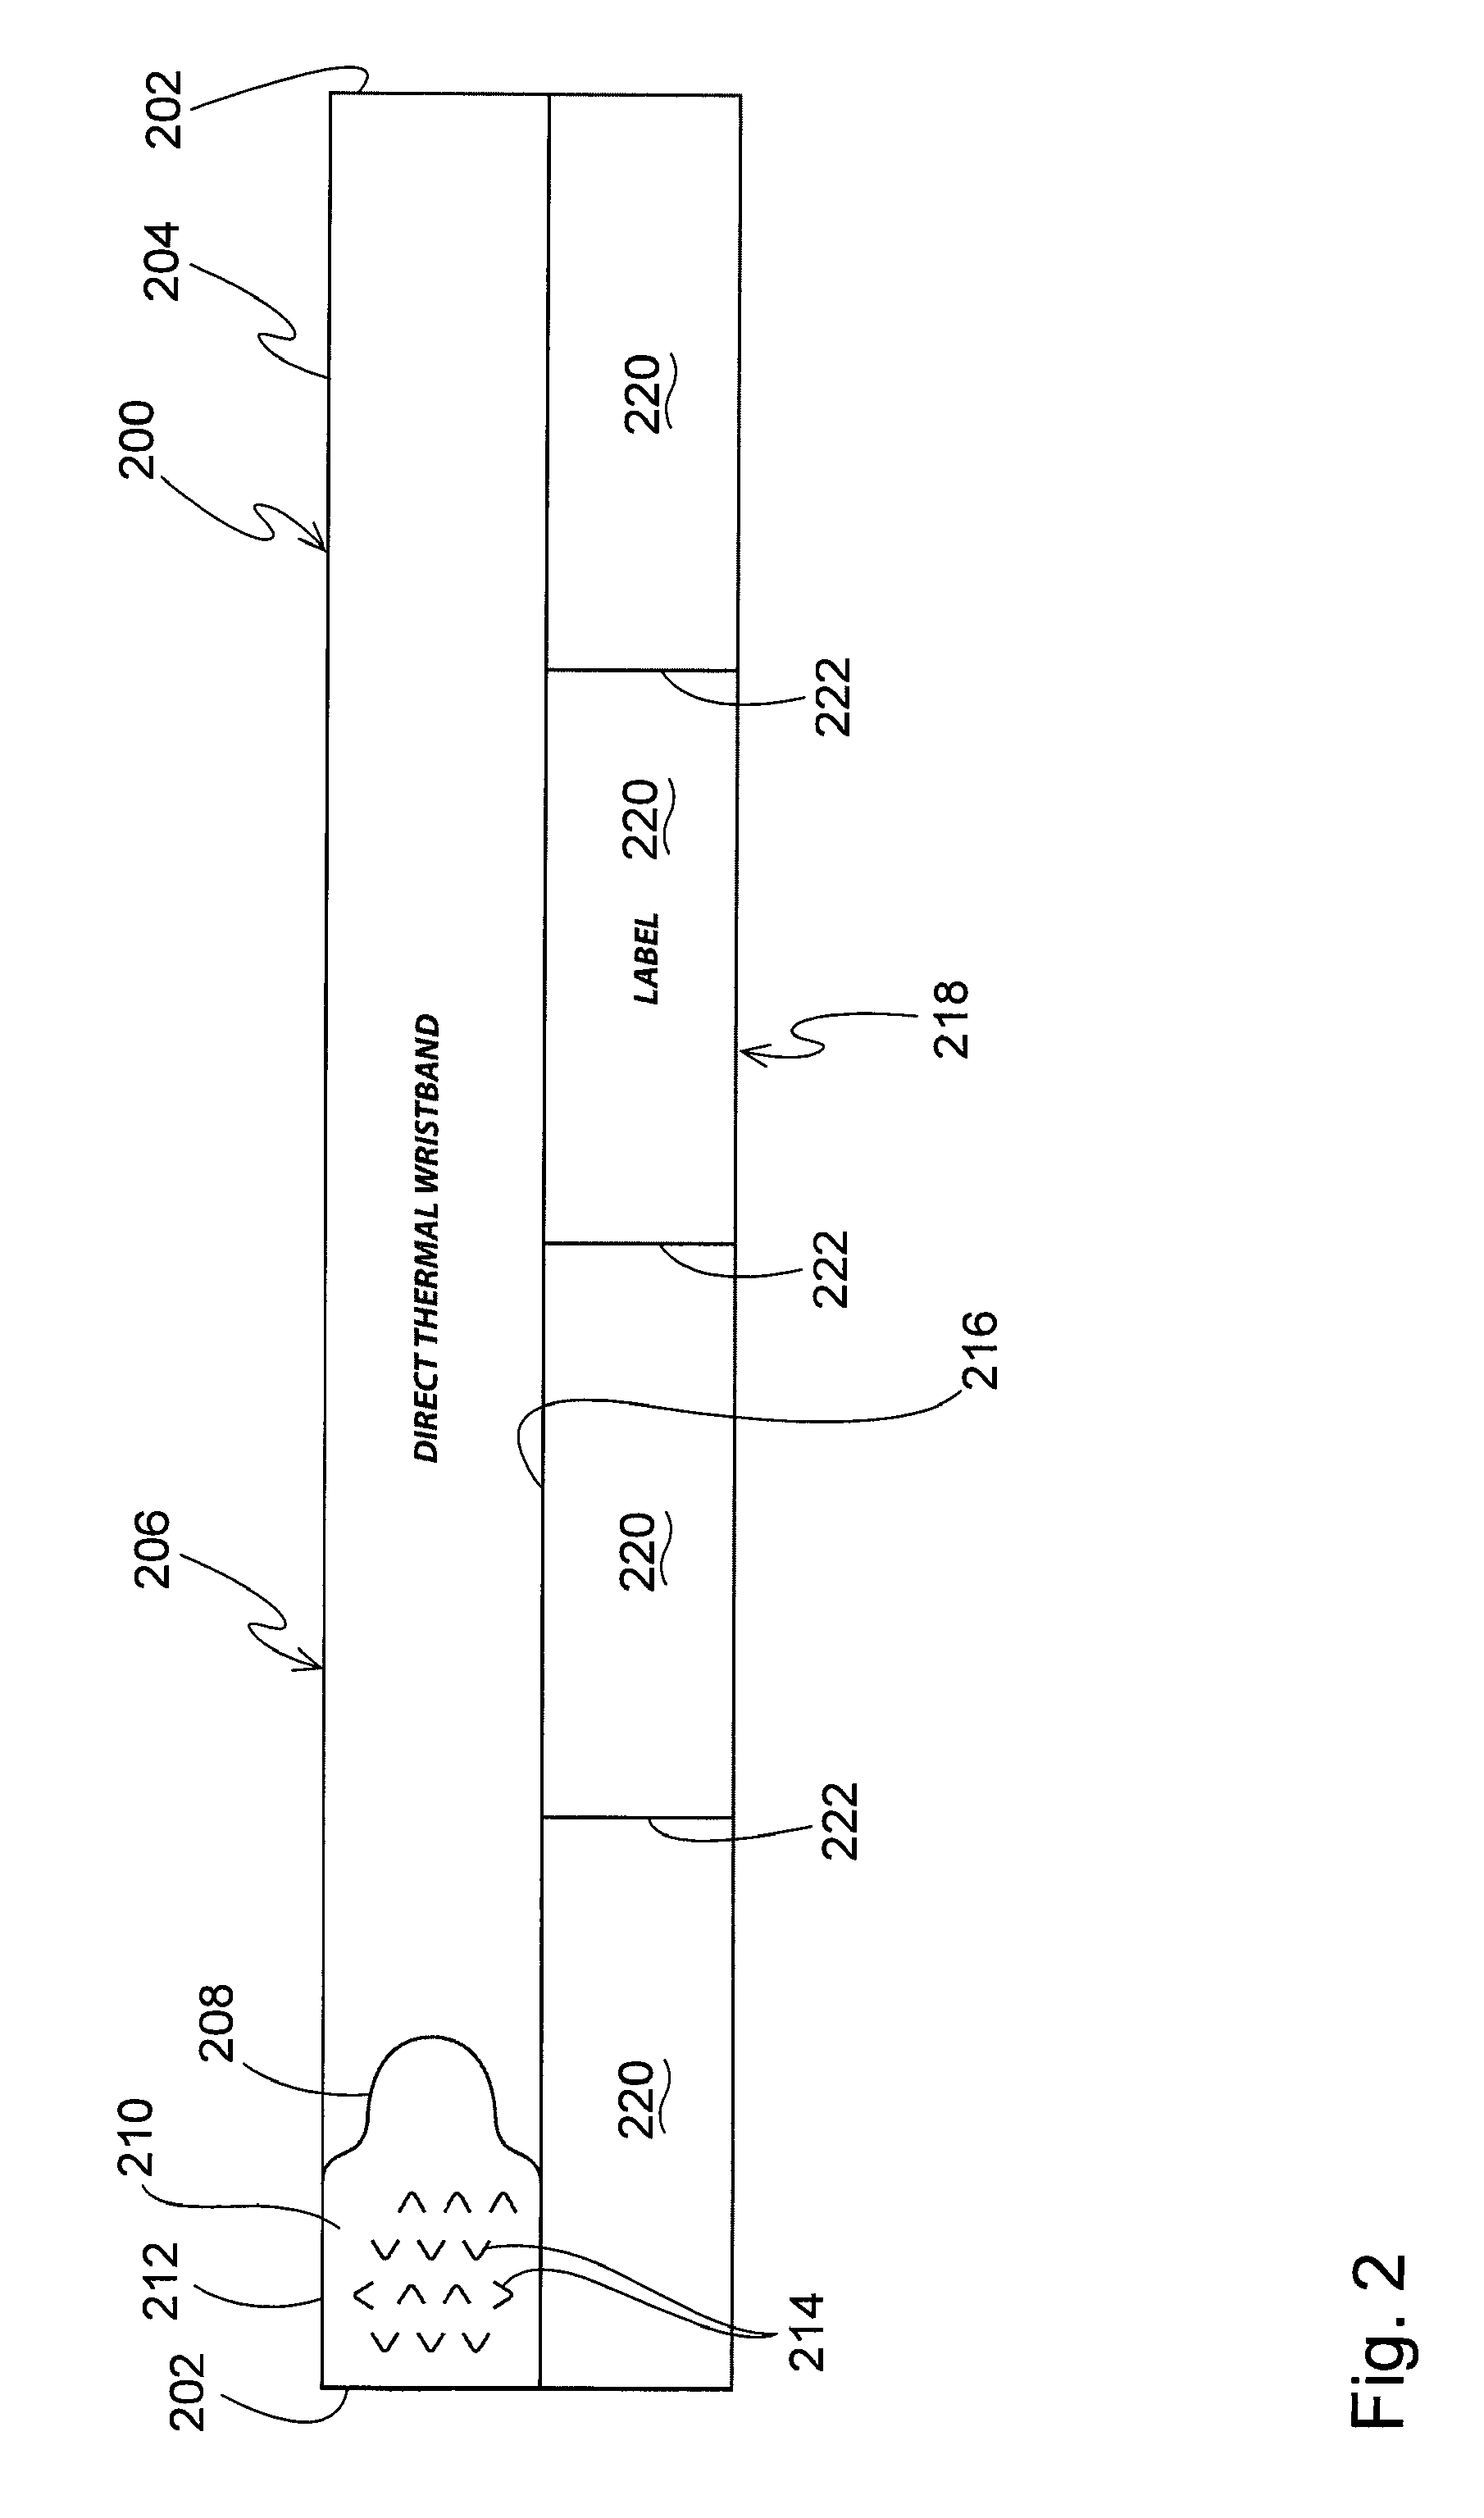 Continuous Strip of Thermal Wristband/Label Forms